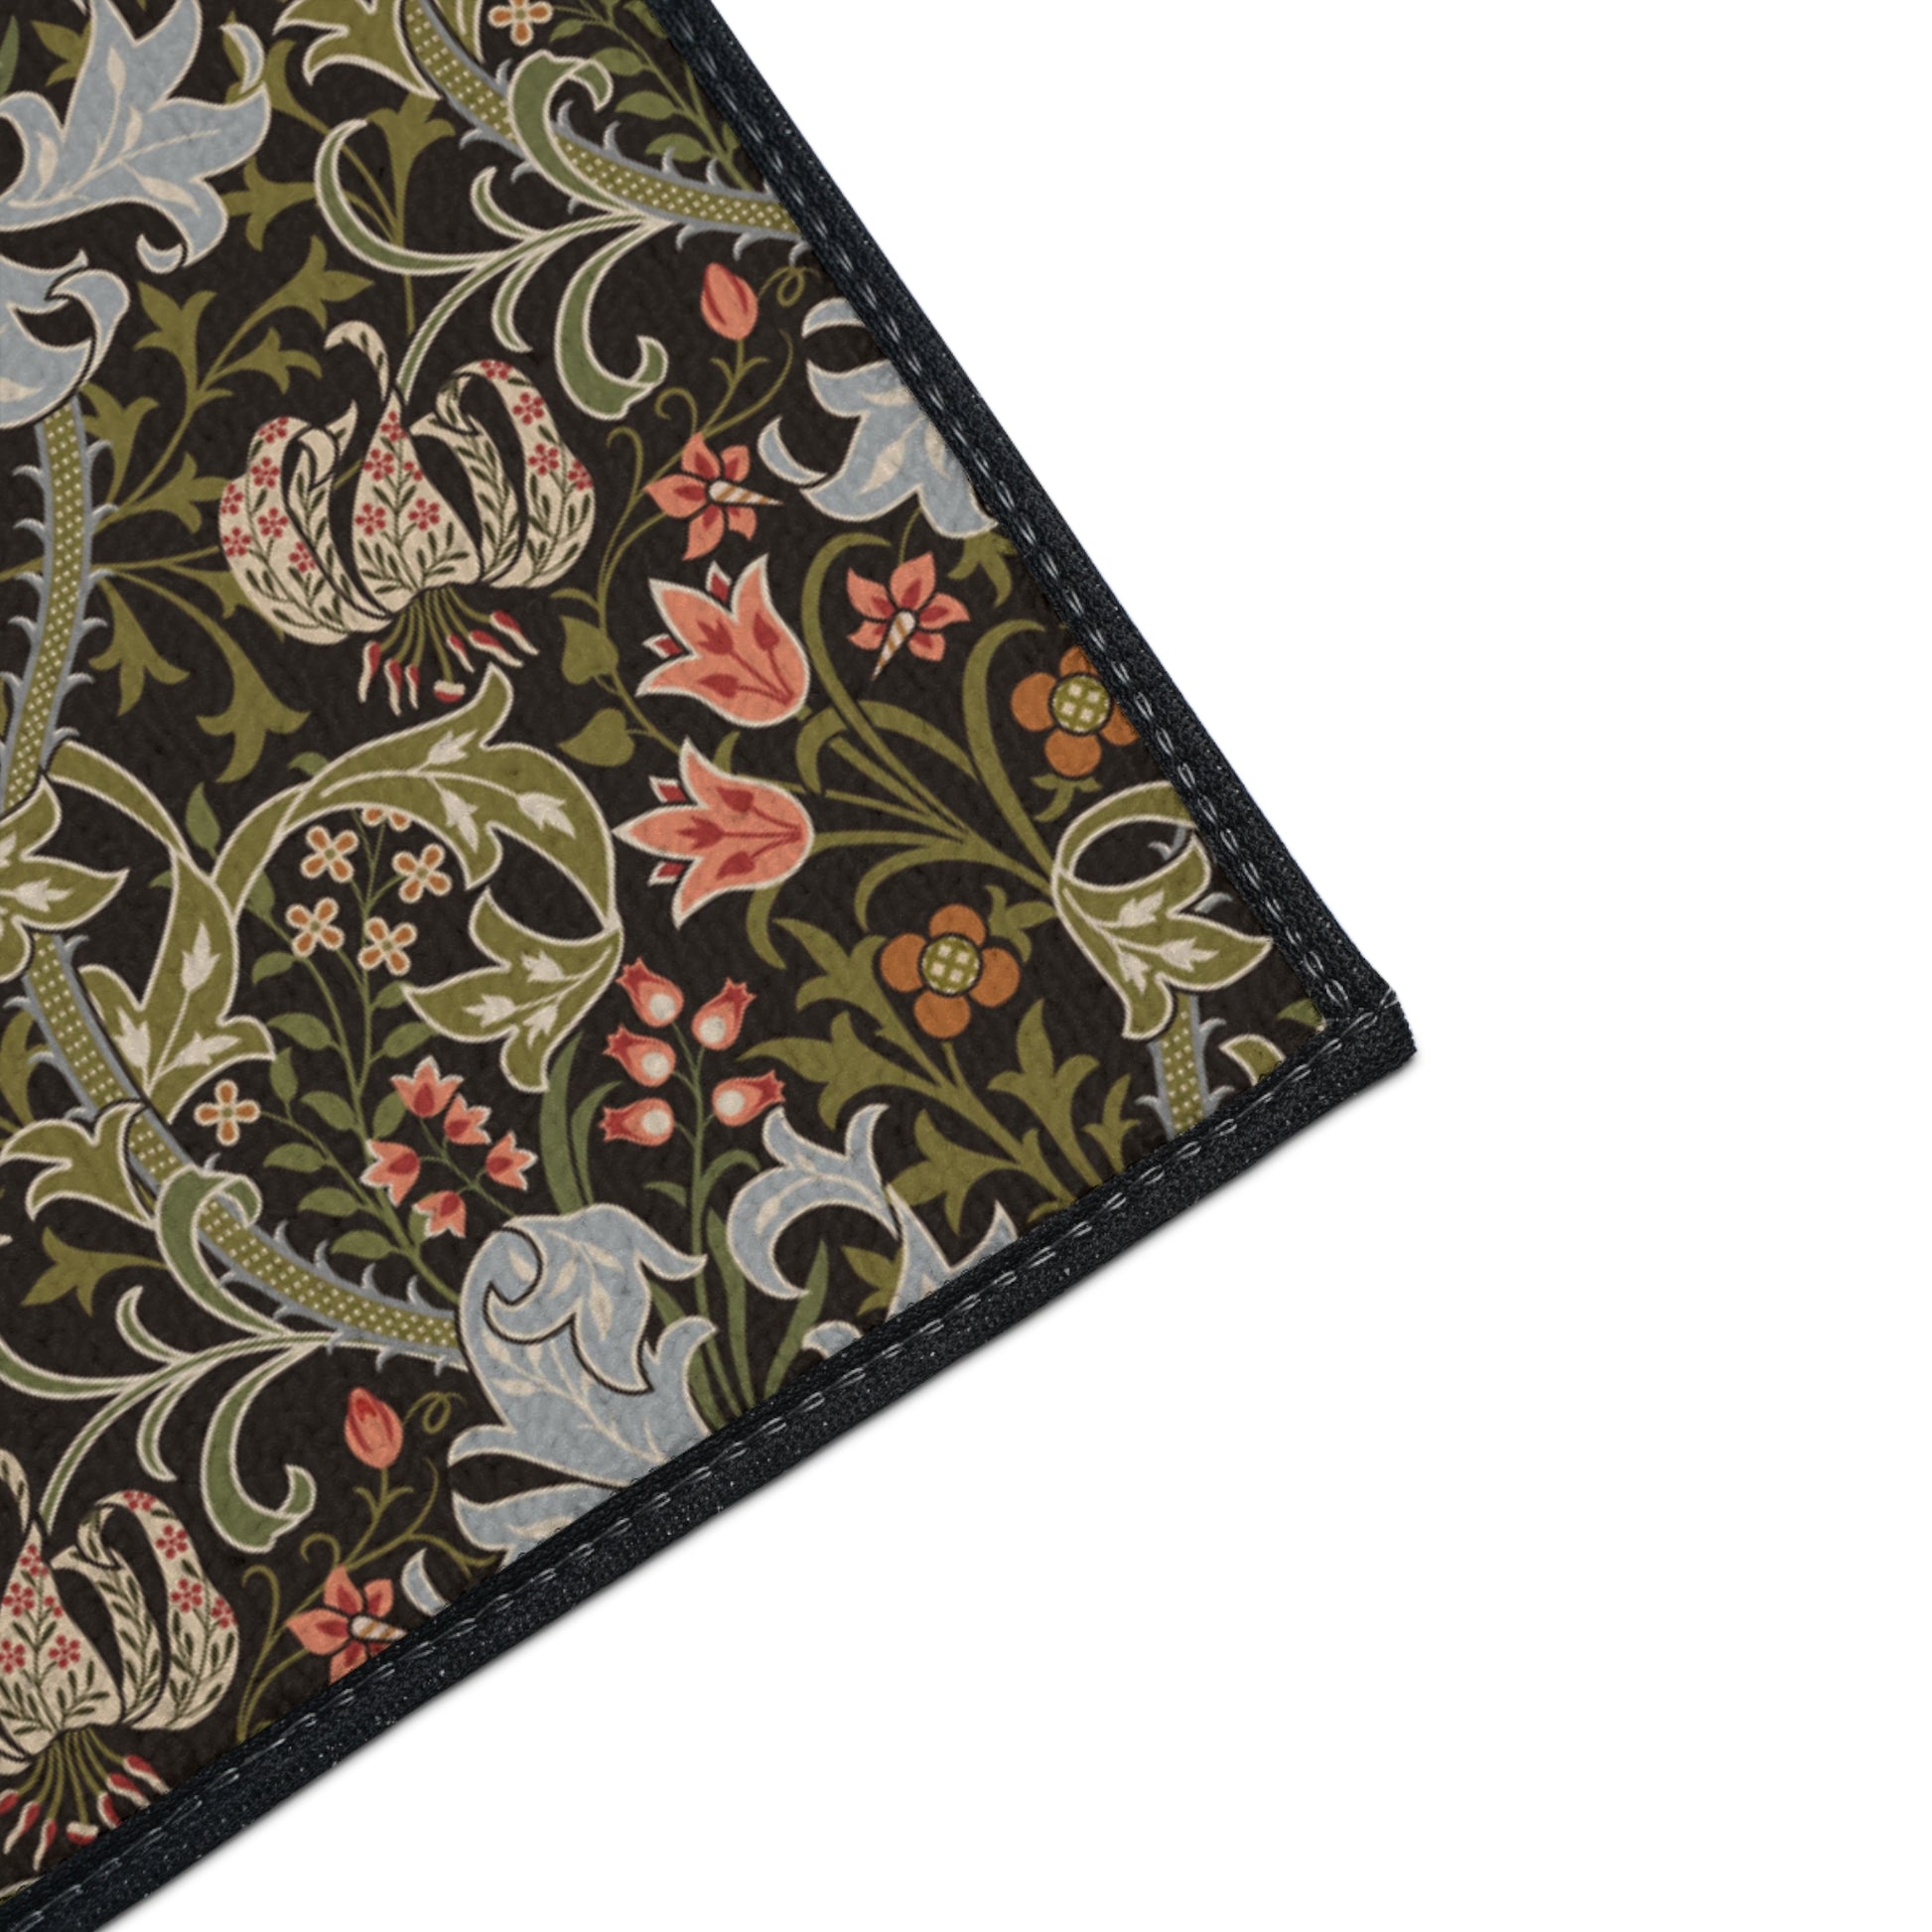 william-morris-co-heavy-duty-floor-mat-golden-lily-collection-midnight-10